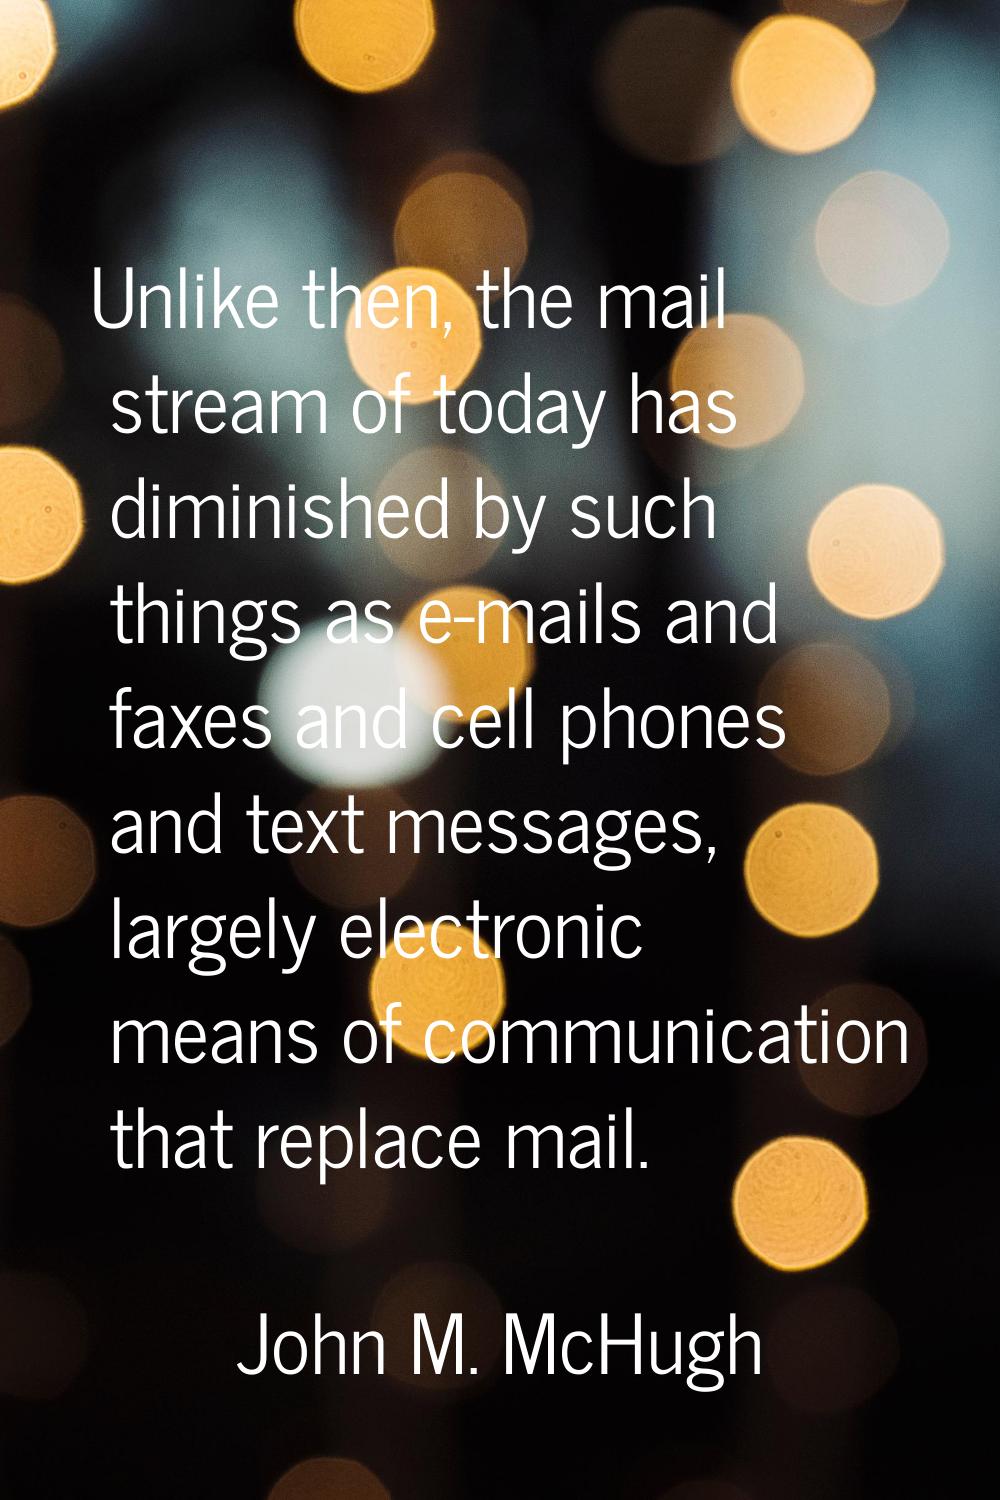 Unlike then, the mail stream of today has diminished by such things as e-mails and faxes and cell p